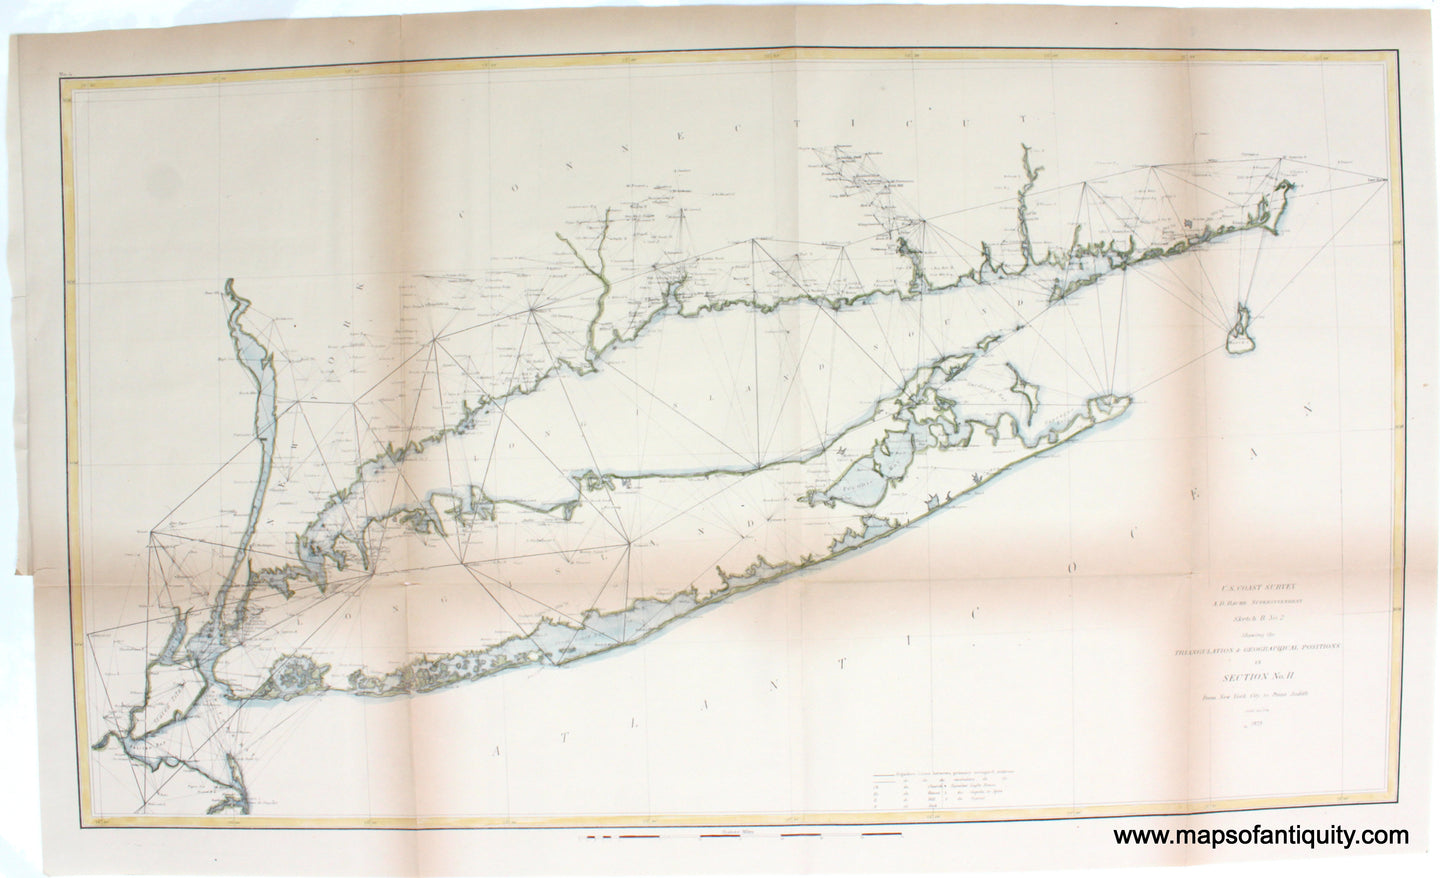 1873 - Long Island Sound, Sketch B No. 2 Showing the Triangulation & Geographical Positions in Section No. II From New York City to Point Judith - Antique Chart